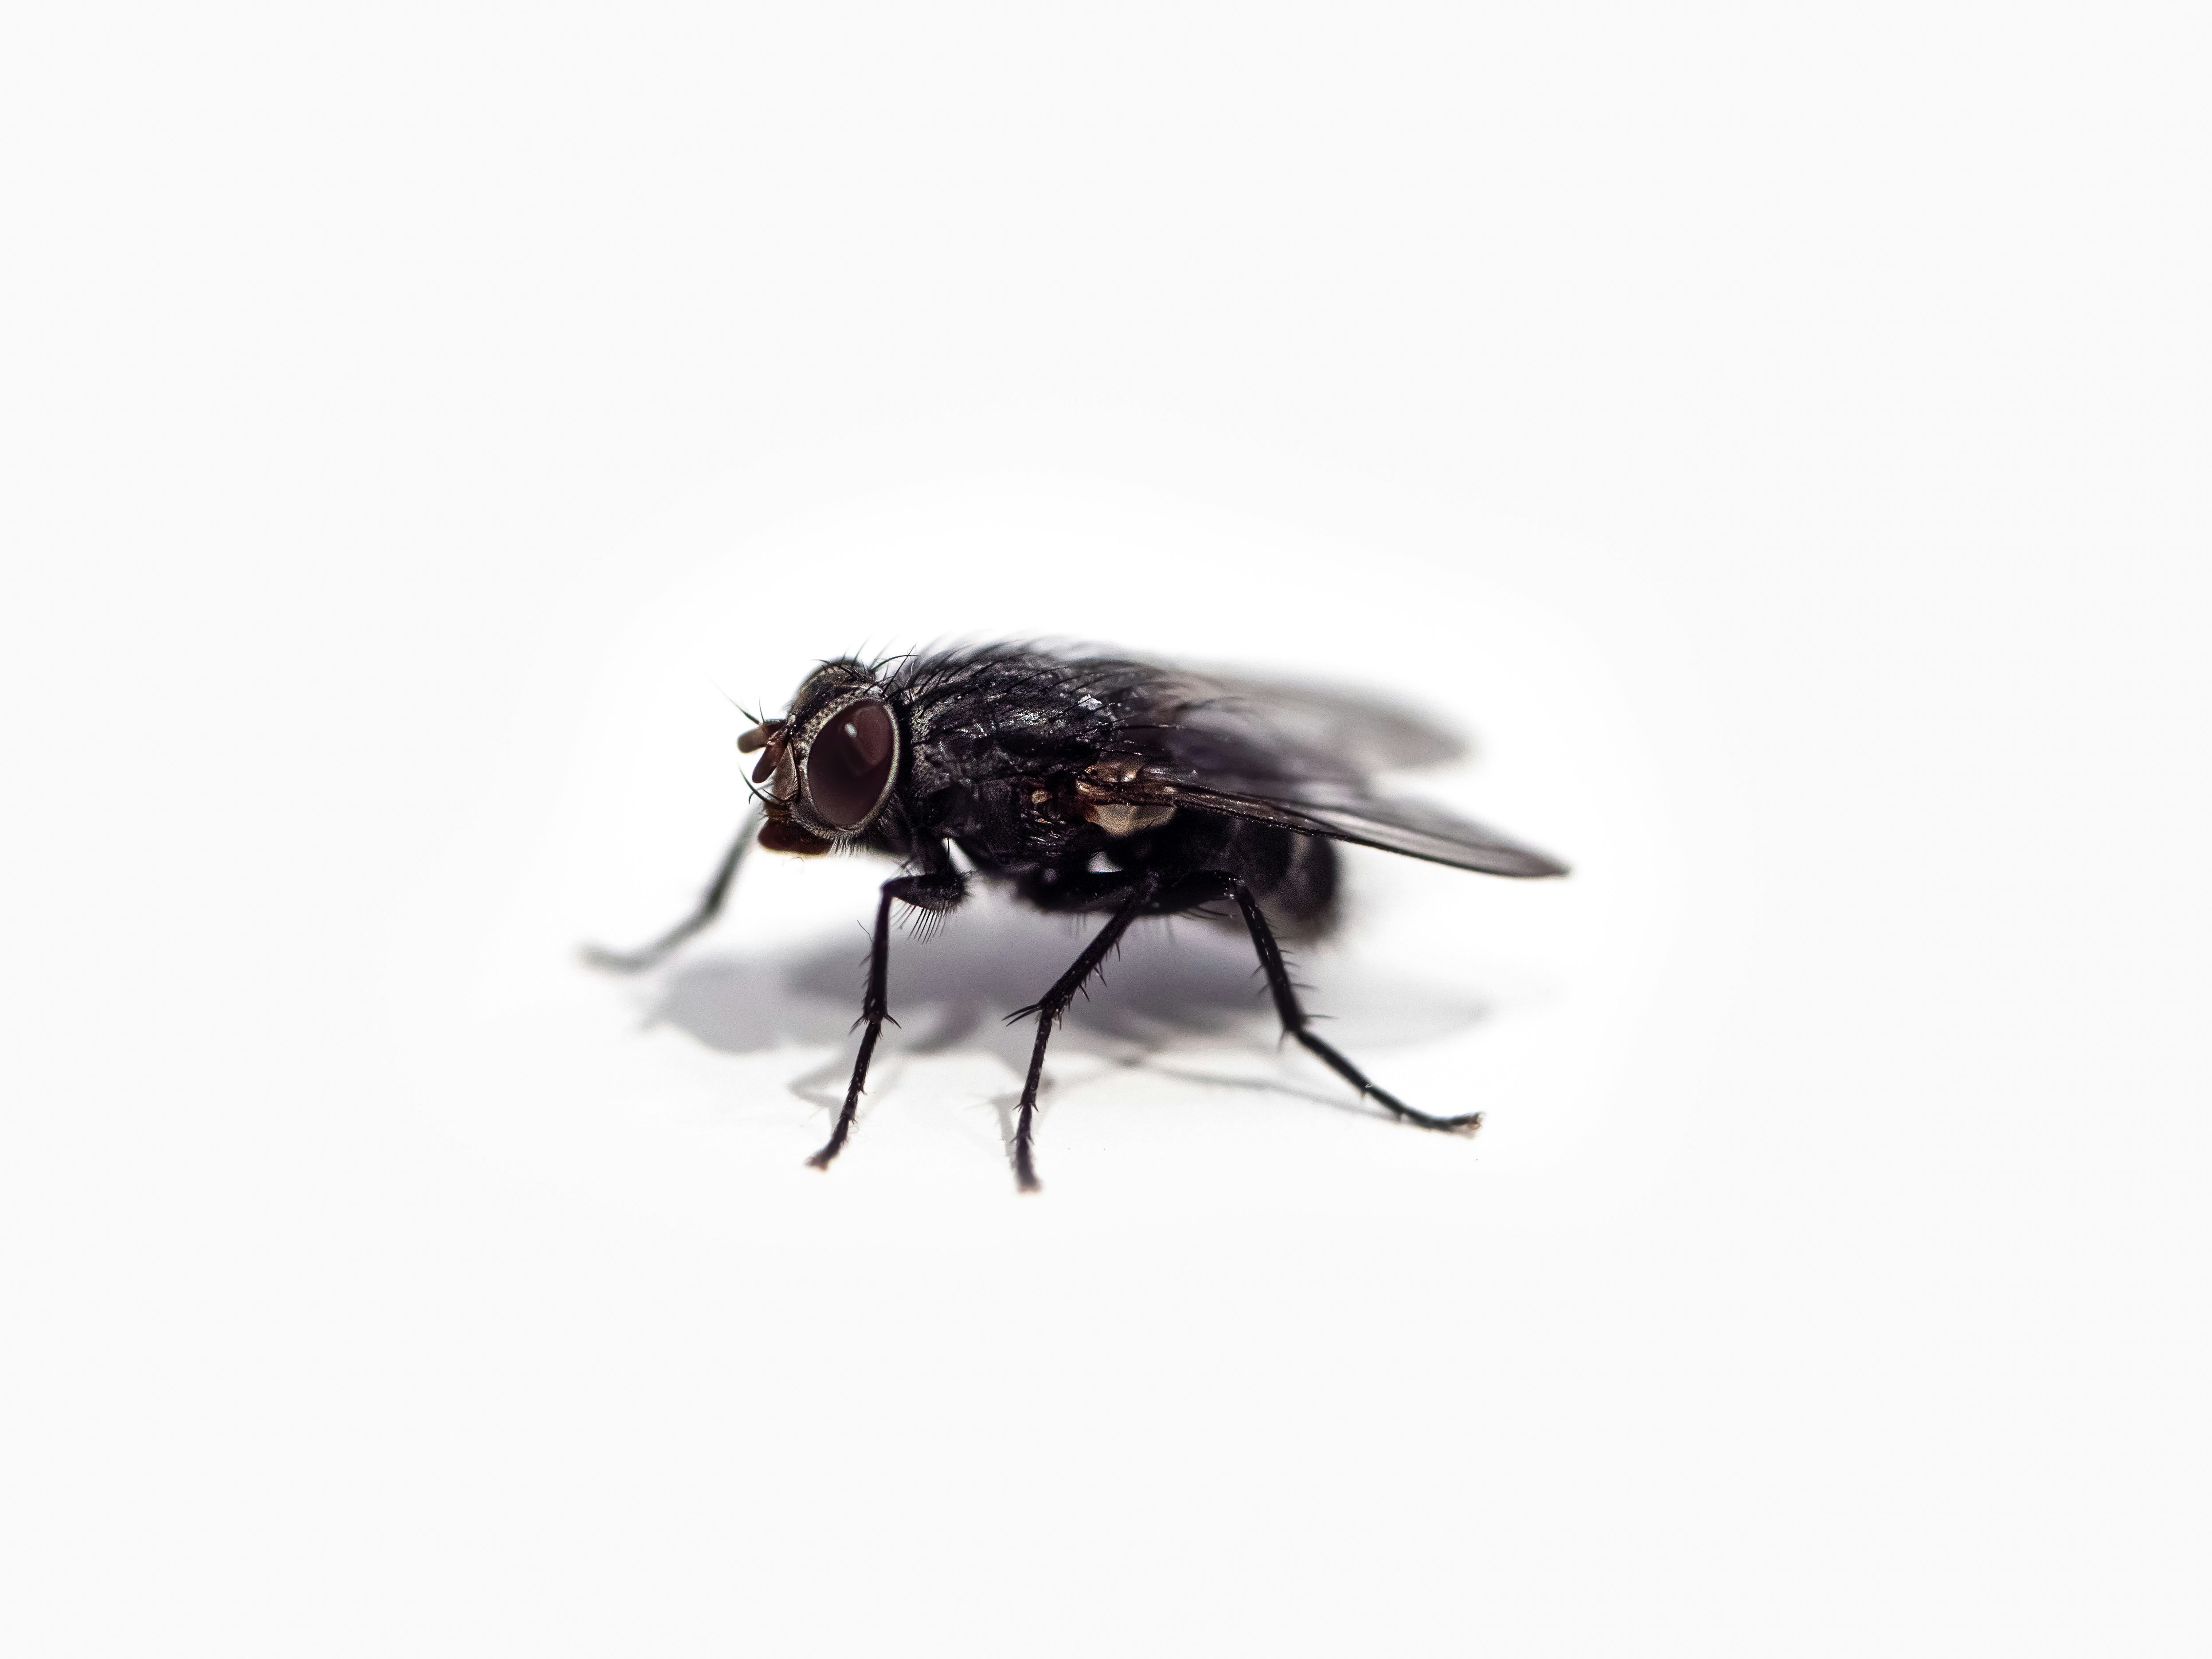 A common housefly isolated on a plain white background.